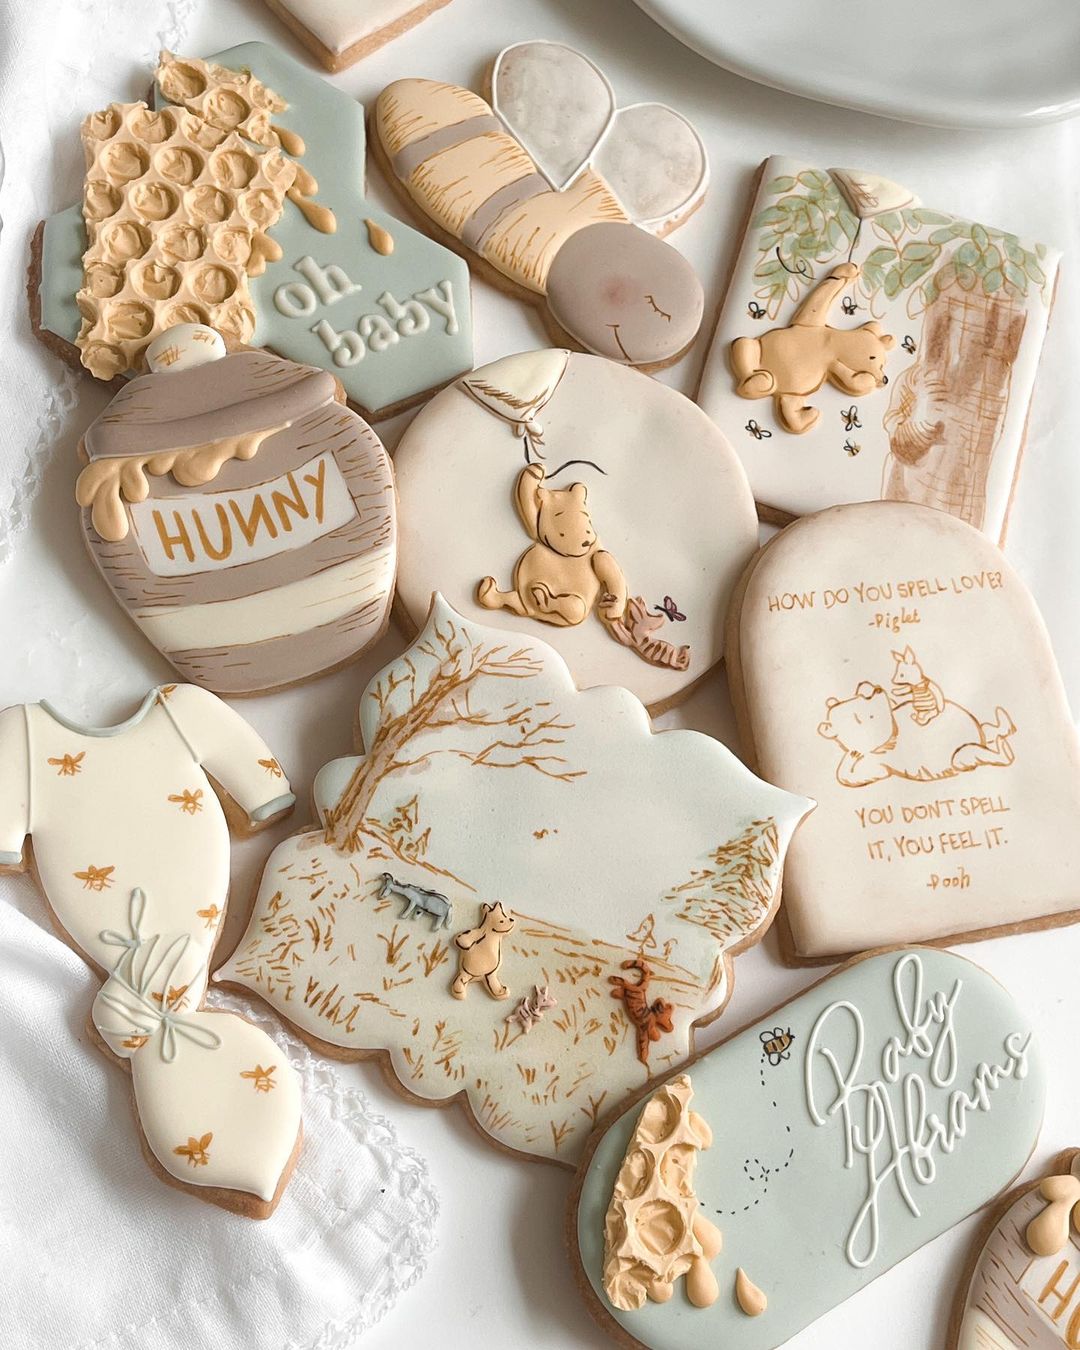 Decorative cookies with Winnie the Pooh imagery on them